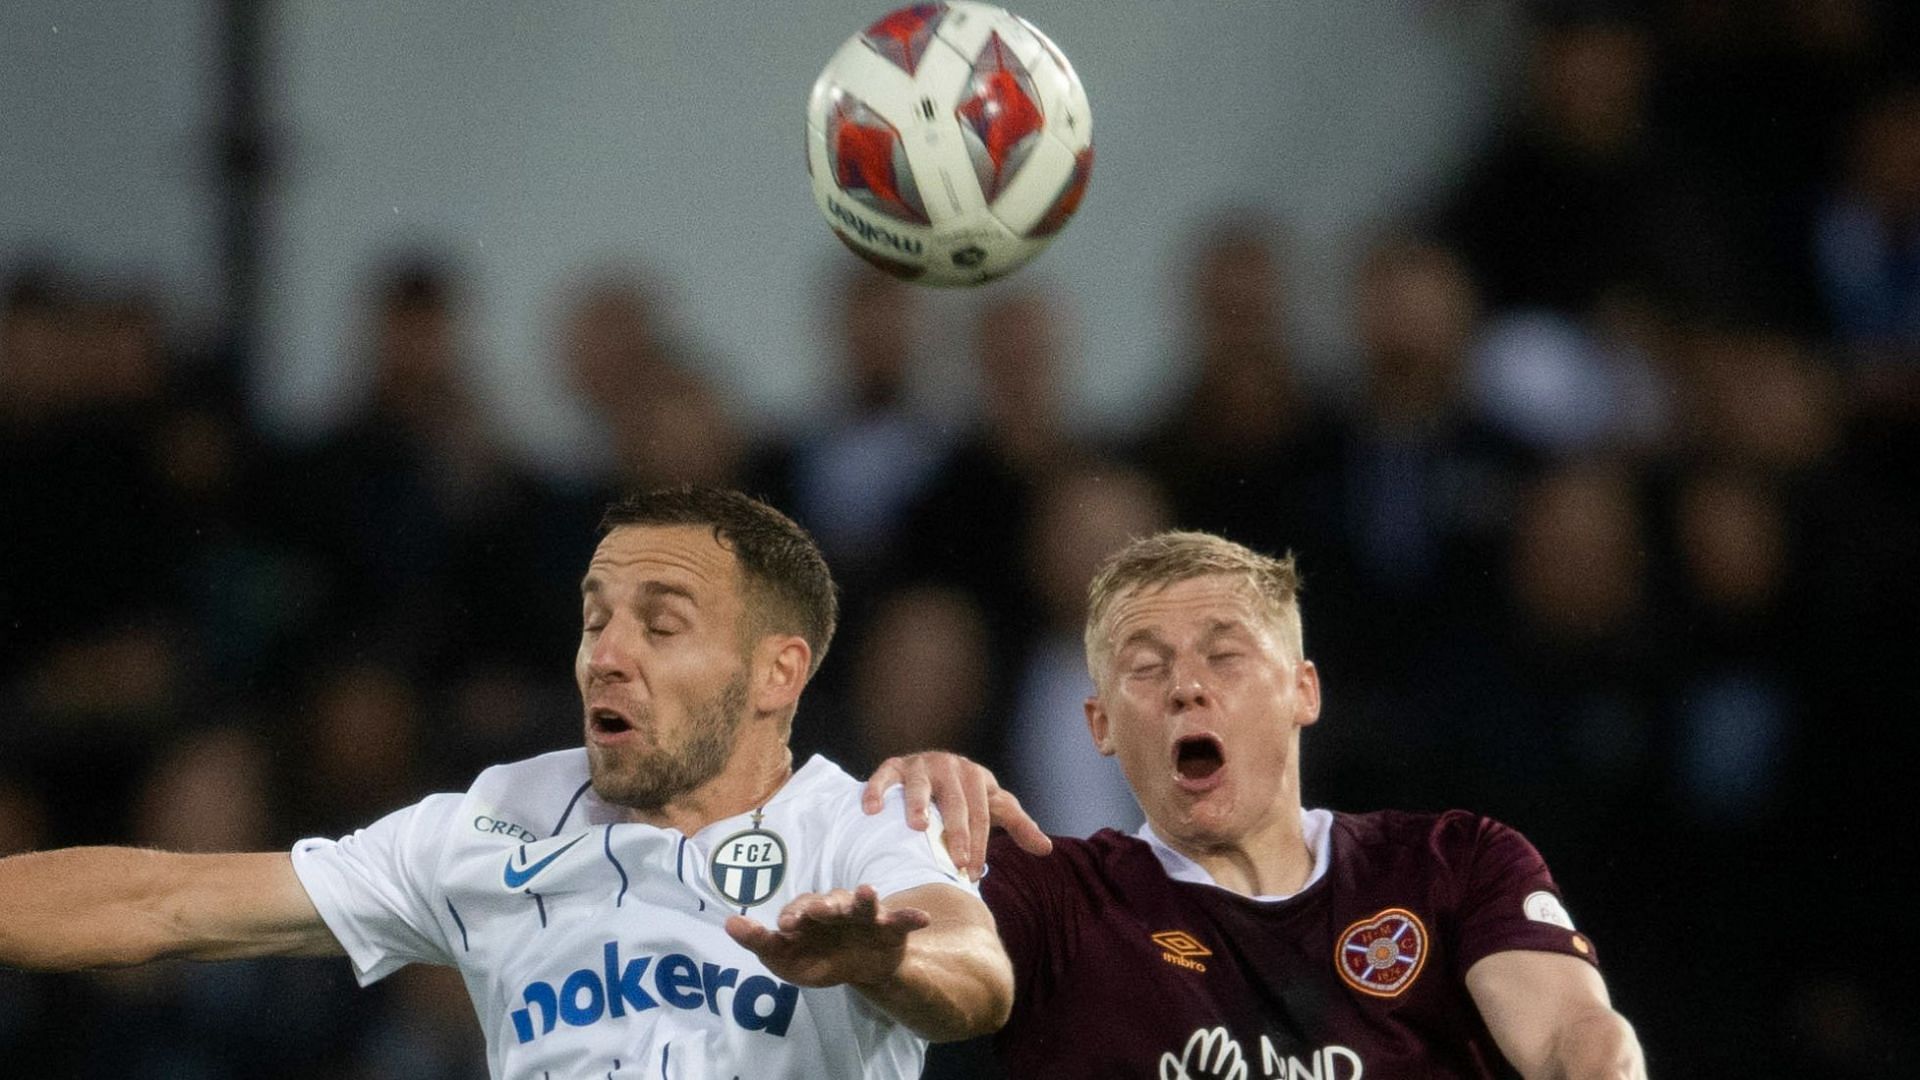 Hearts and Zurich will meet in their Europa League playoff fixture on Thursday